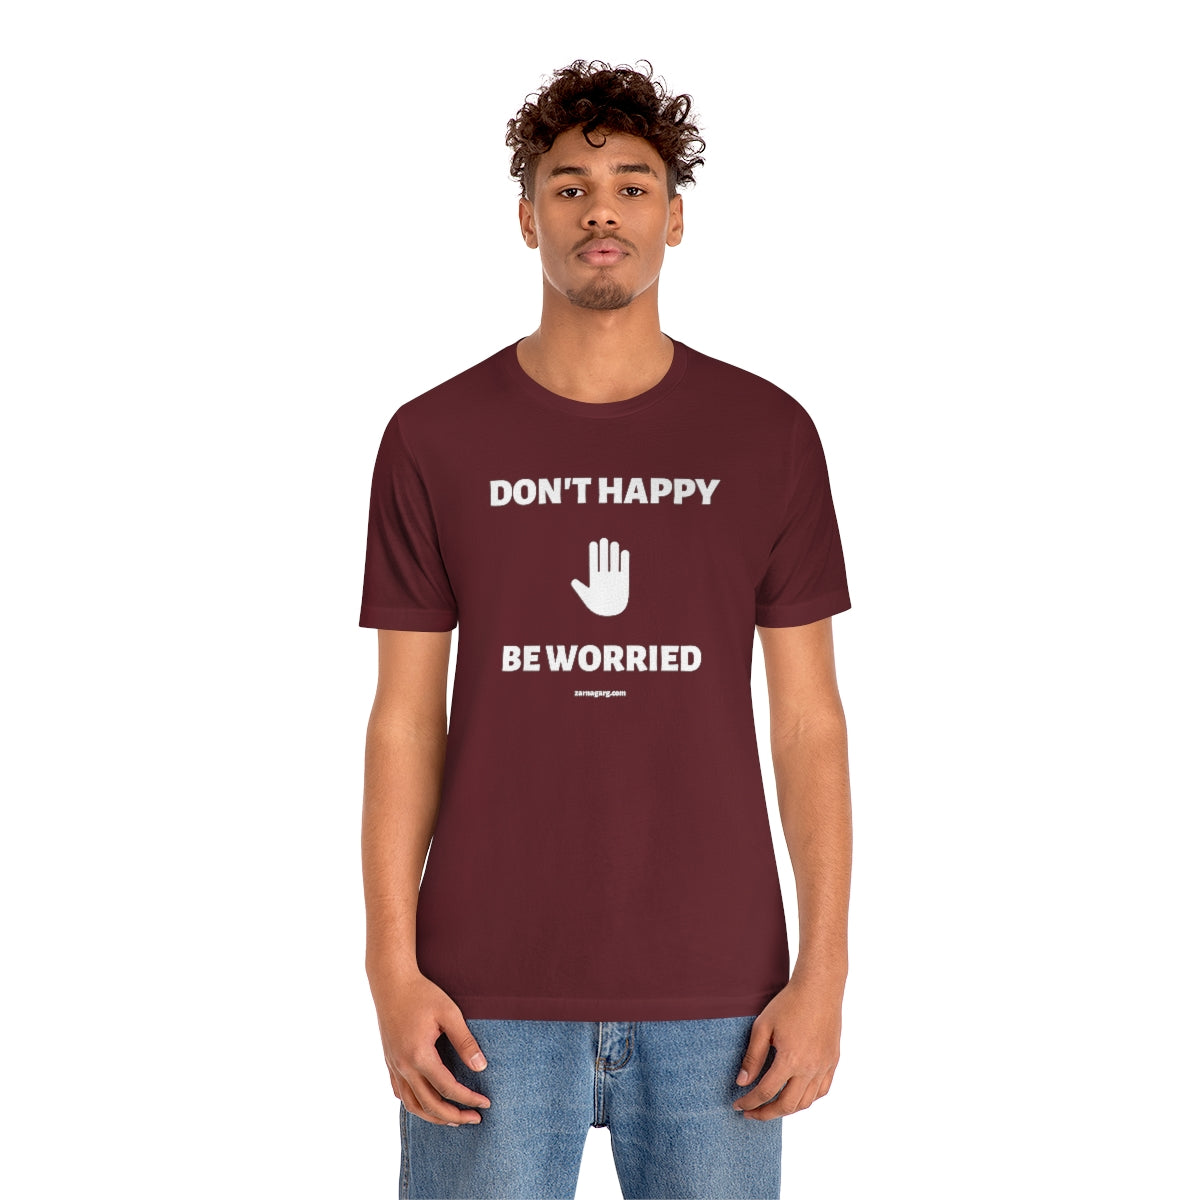 Don't Happy, Be Worried Tee